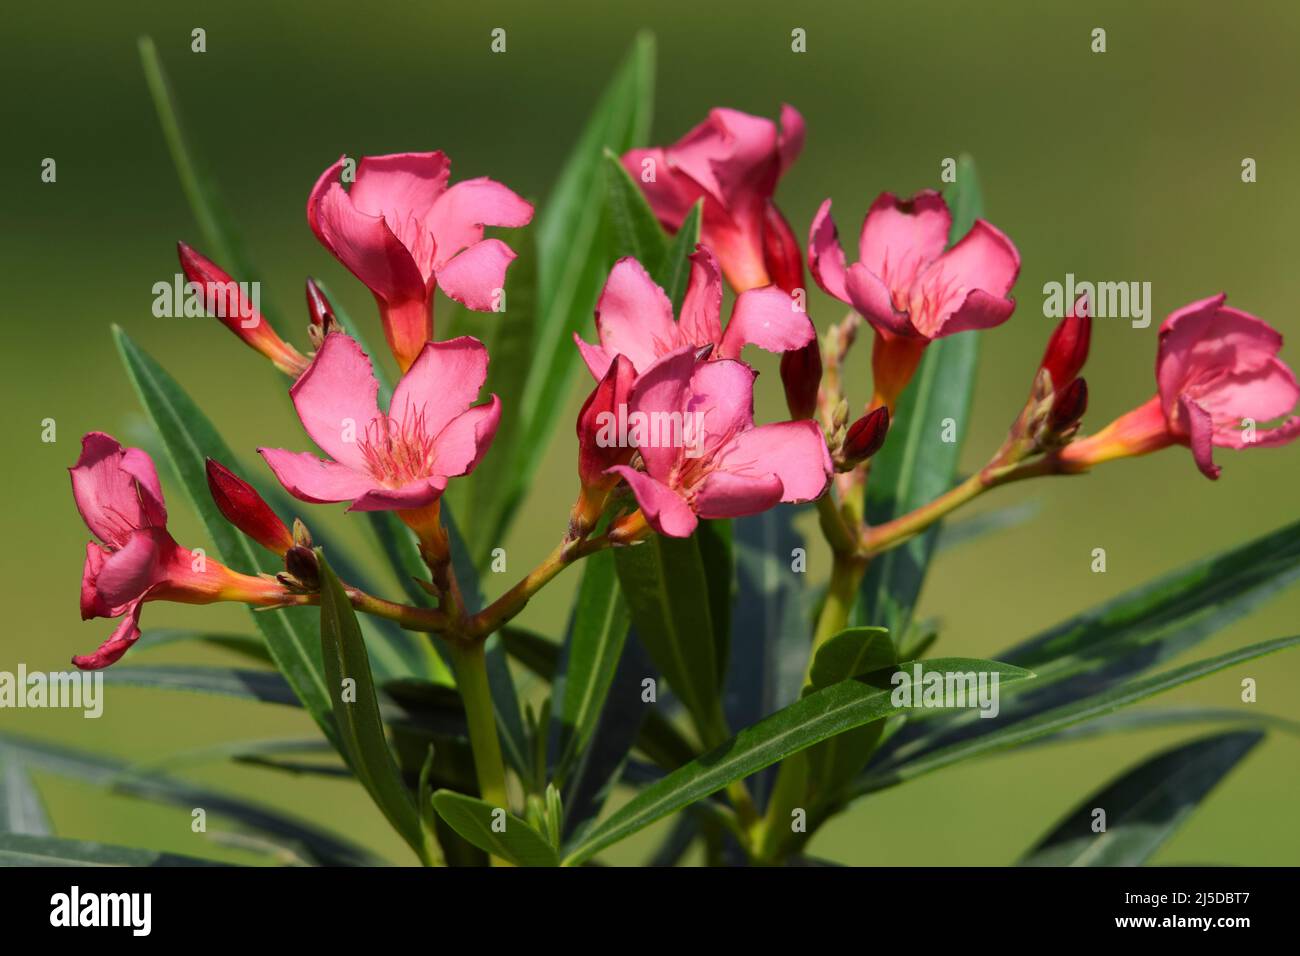 Close up of Cascabela thevetia flowers also known as Kaner flower. Dark pink color Nerium oleander flowers bunch foliage in green background. Beautifu Stock Photo